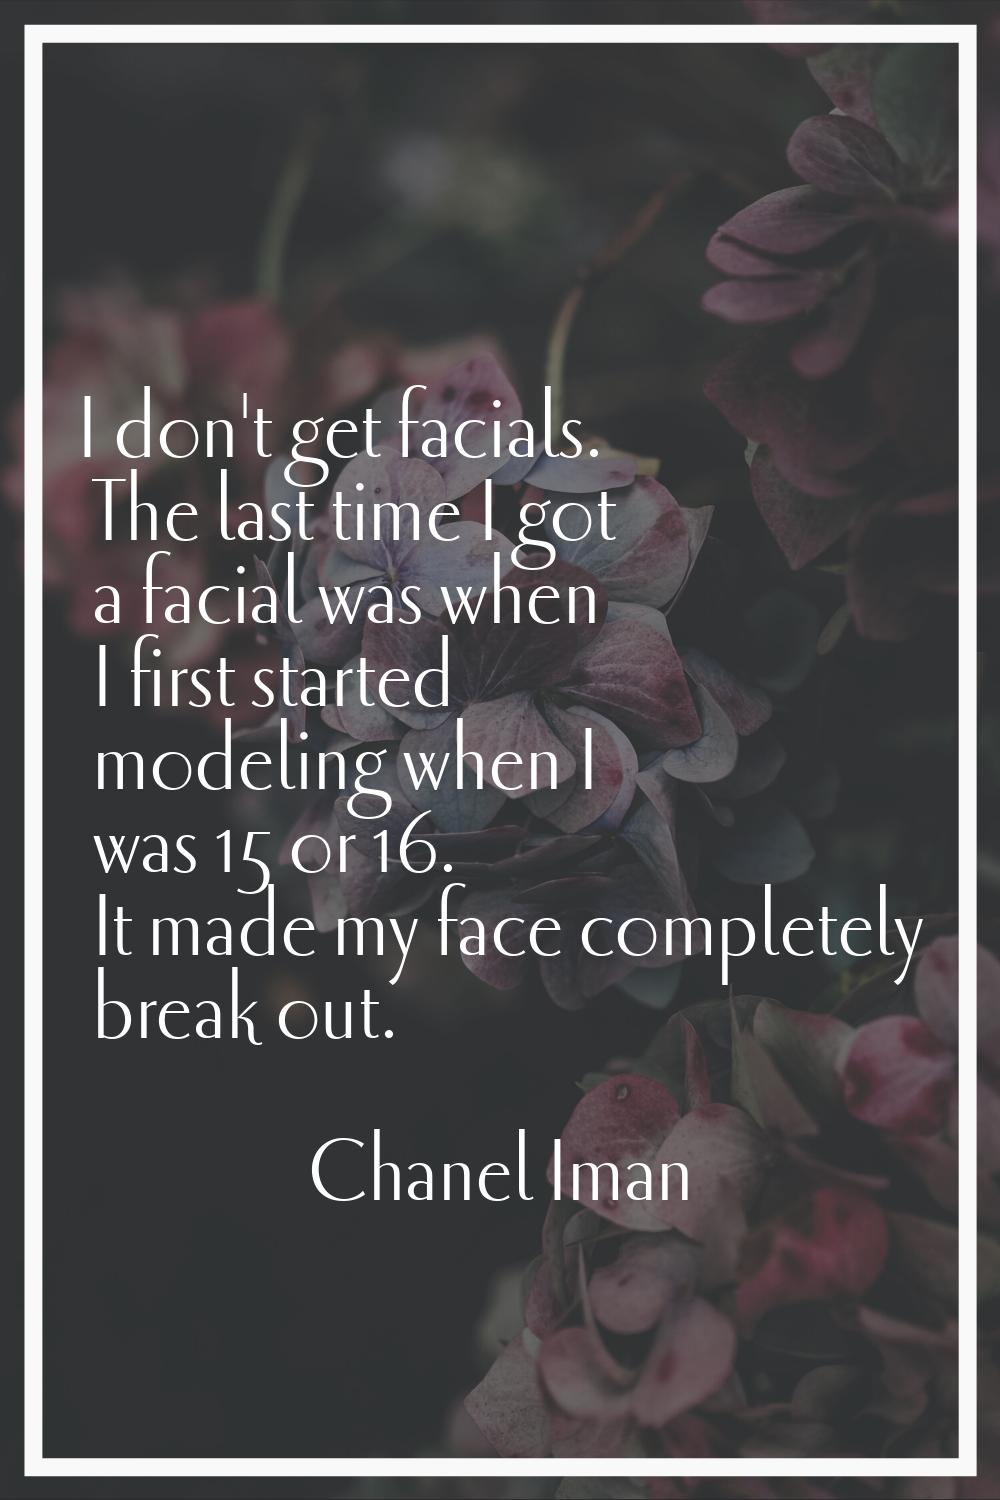 I don't get facials. The last time I got a facial was when I first started modeling when I was 15 o